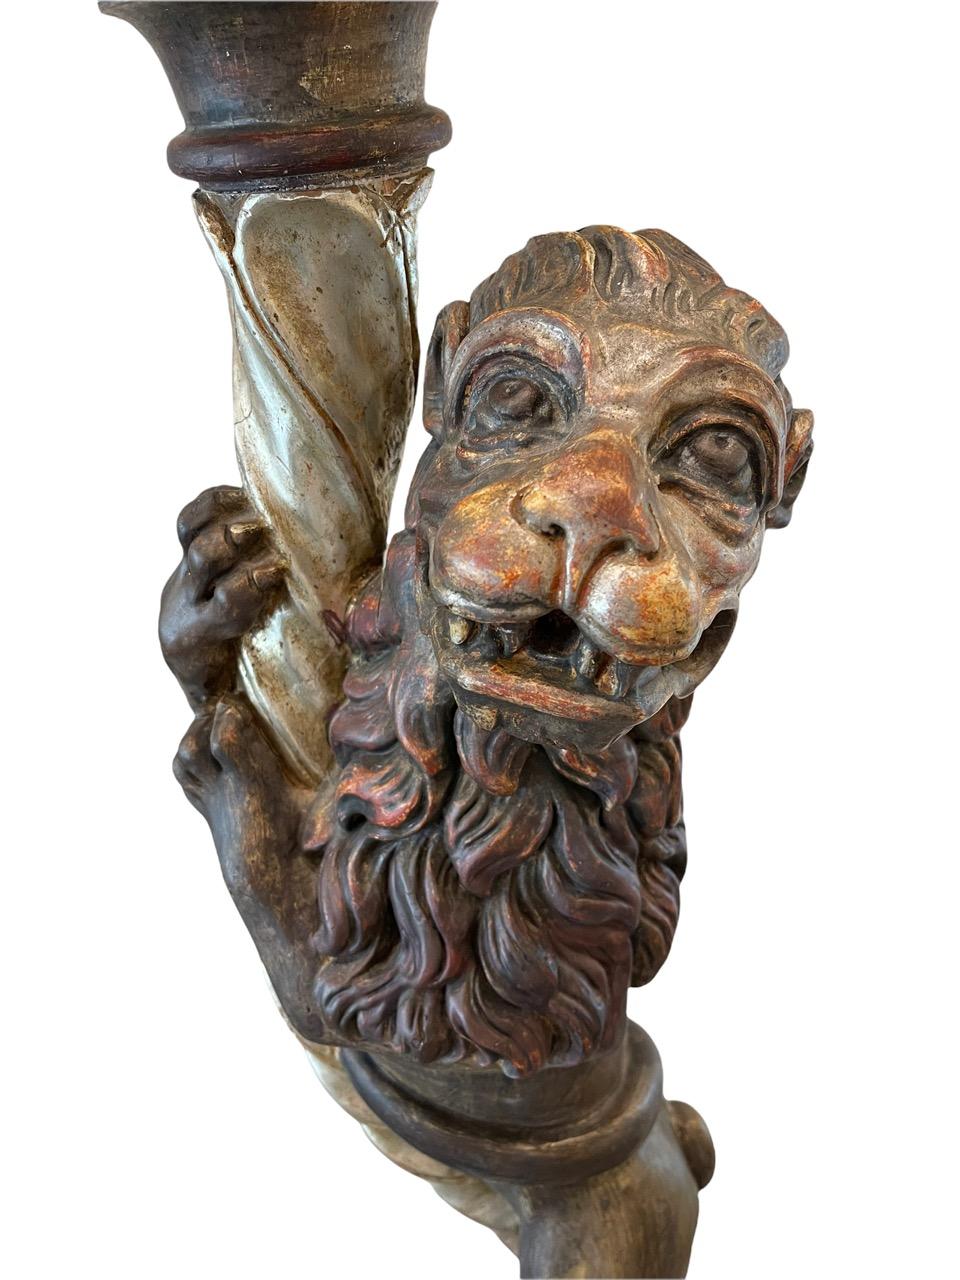 19th Century Russian Empire Carved Wood Candle Holder Sculpture For Sale 1